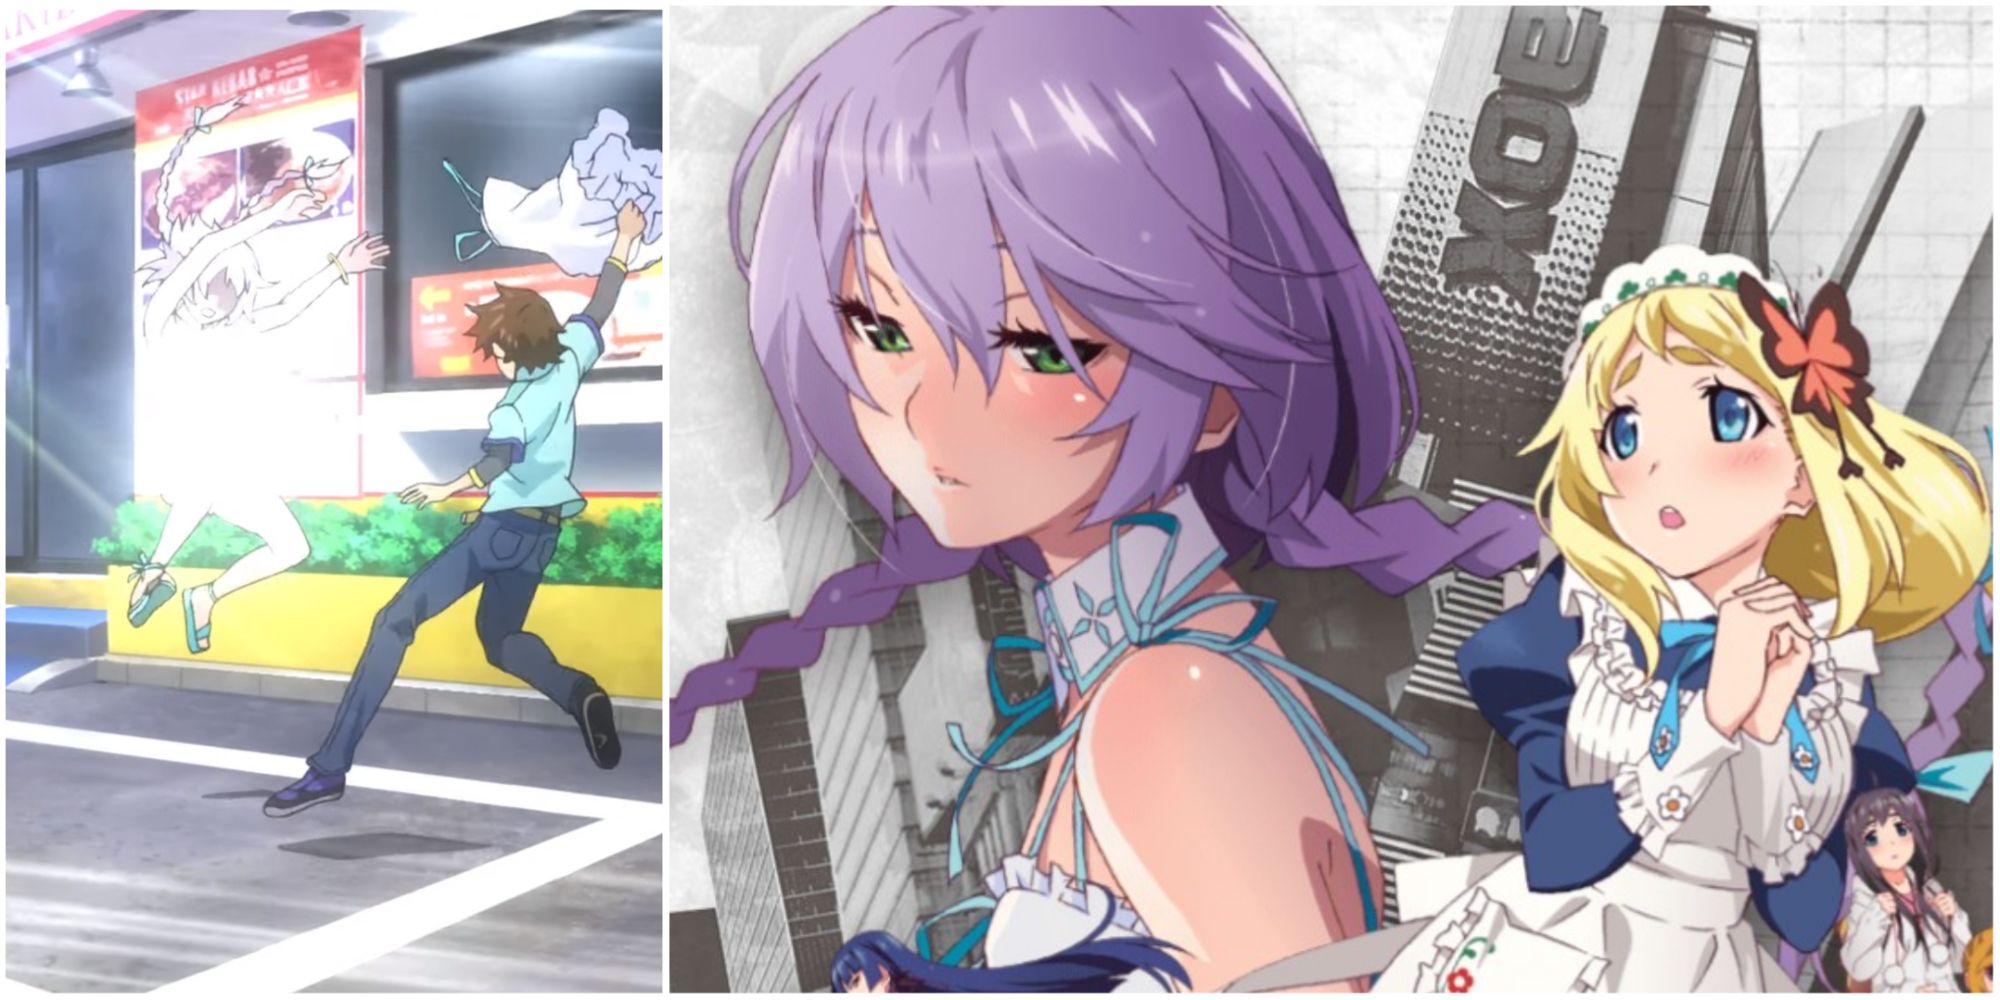 Banner image for Akiba's Strip: Undead & Undressed Director's Cut, including a cutscene screenshot and main art from the game's website